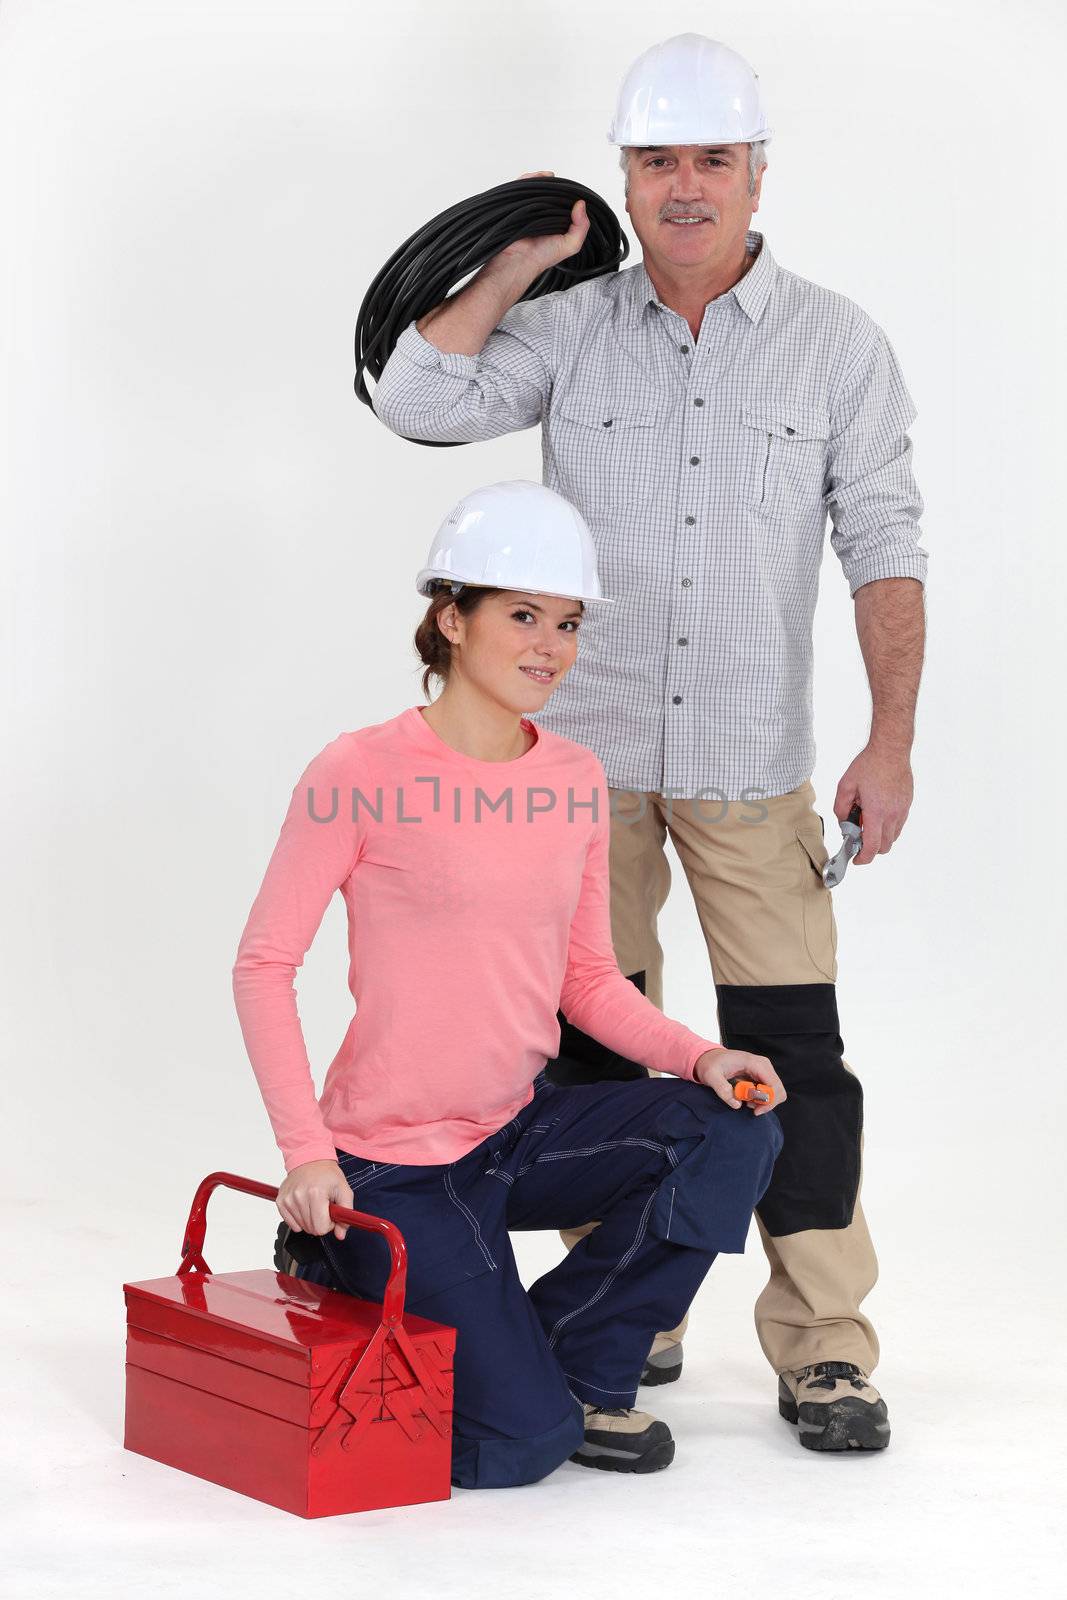 An electrician and his apprentice. by phovoir